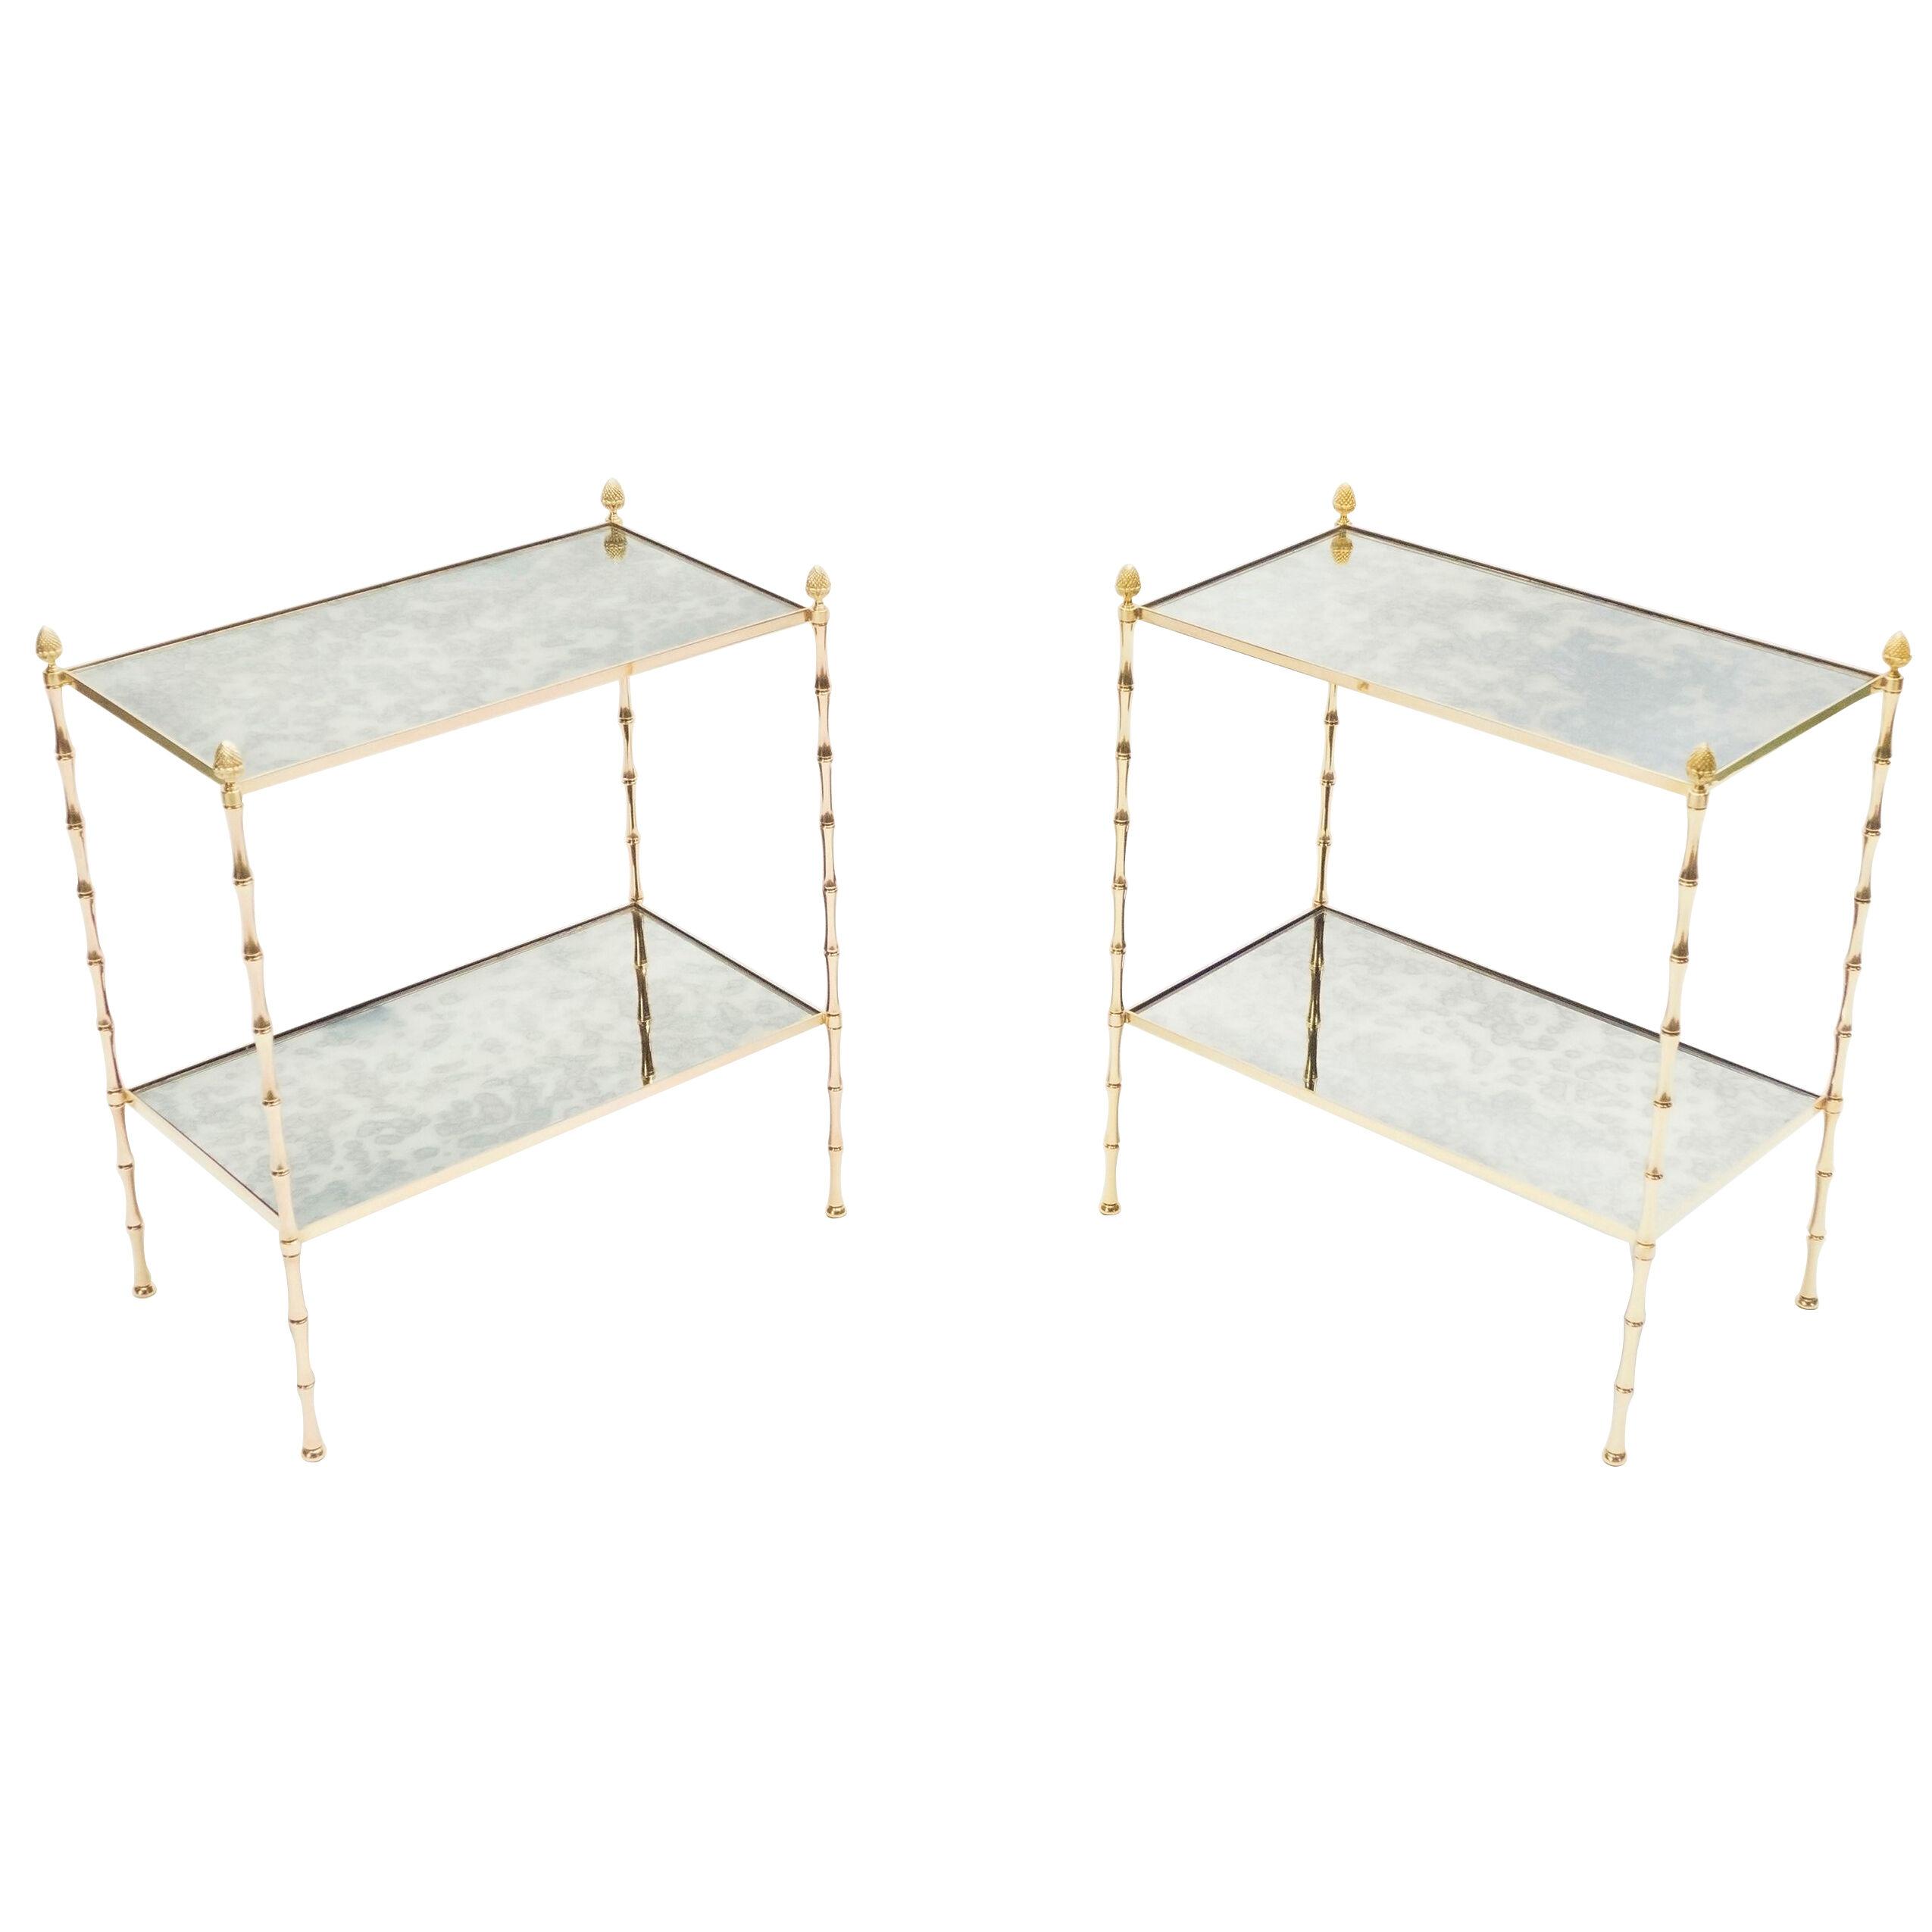 Pair of French Maison Baguès Bamboo Brass Mirrored Two-Tier End Tables, 1960s